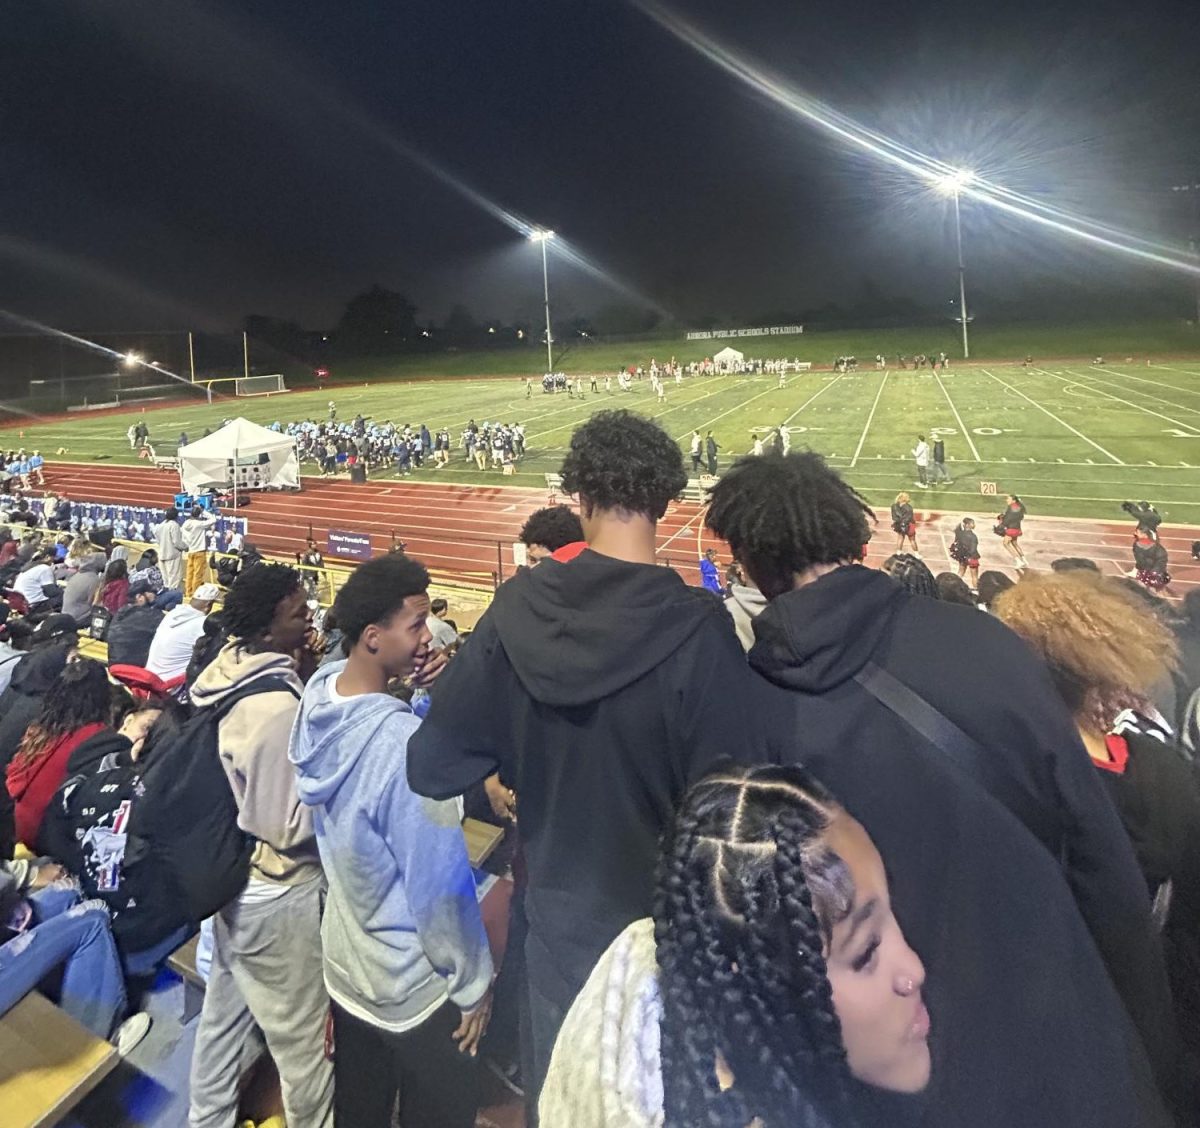 Students watch the Vista Peak and Rangeview football game before the game was cancelled in the 3rd quarter.